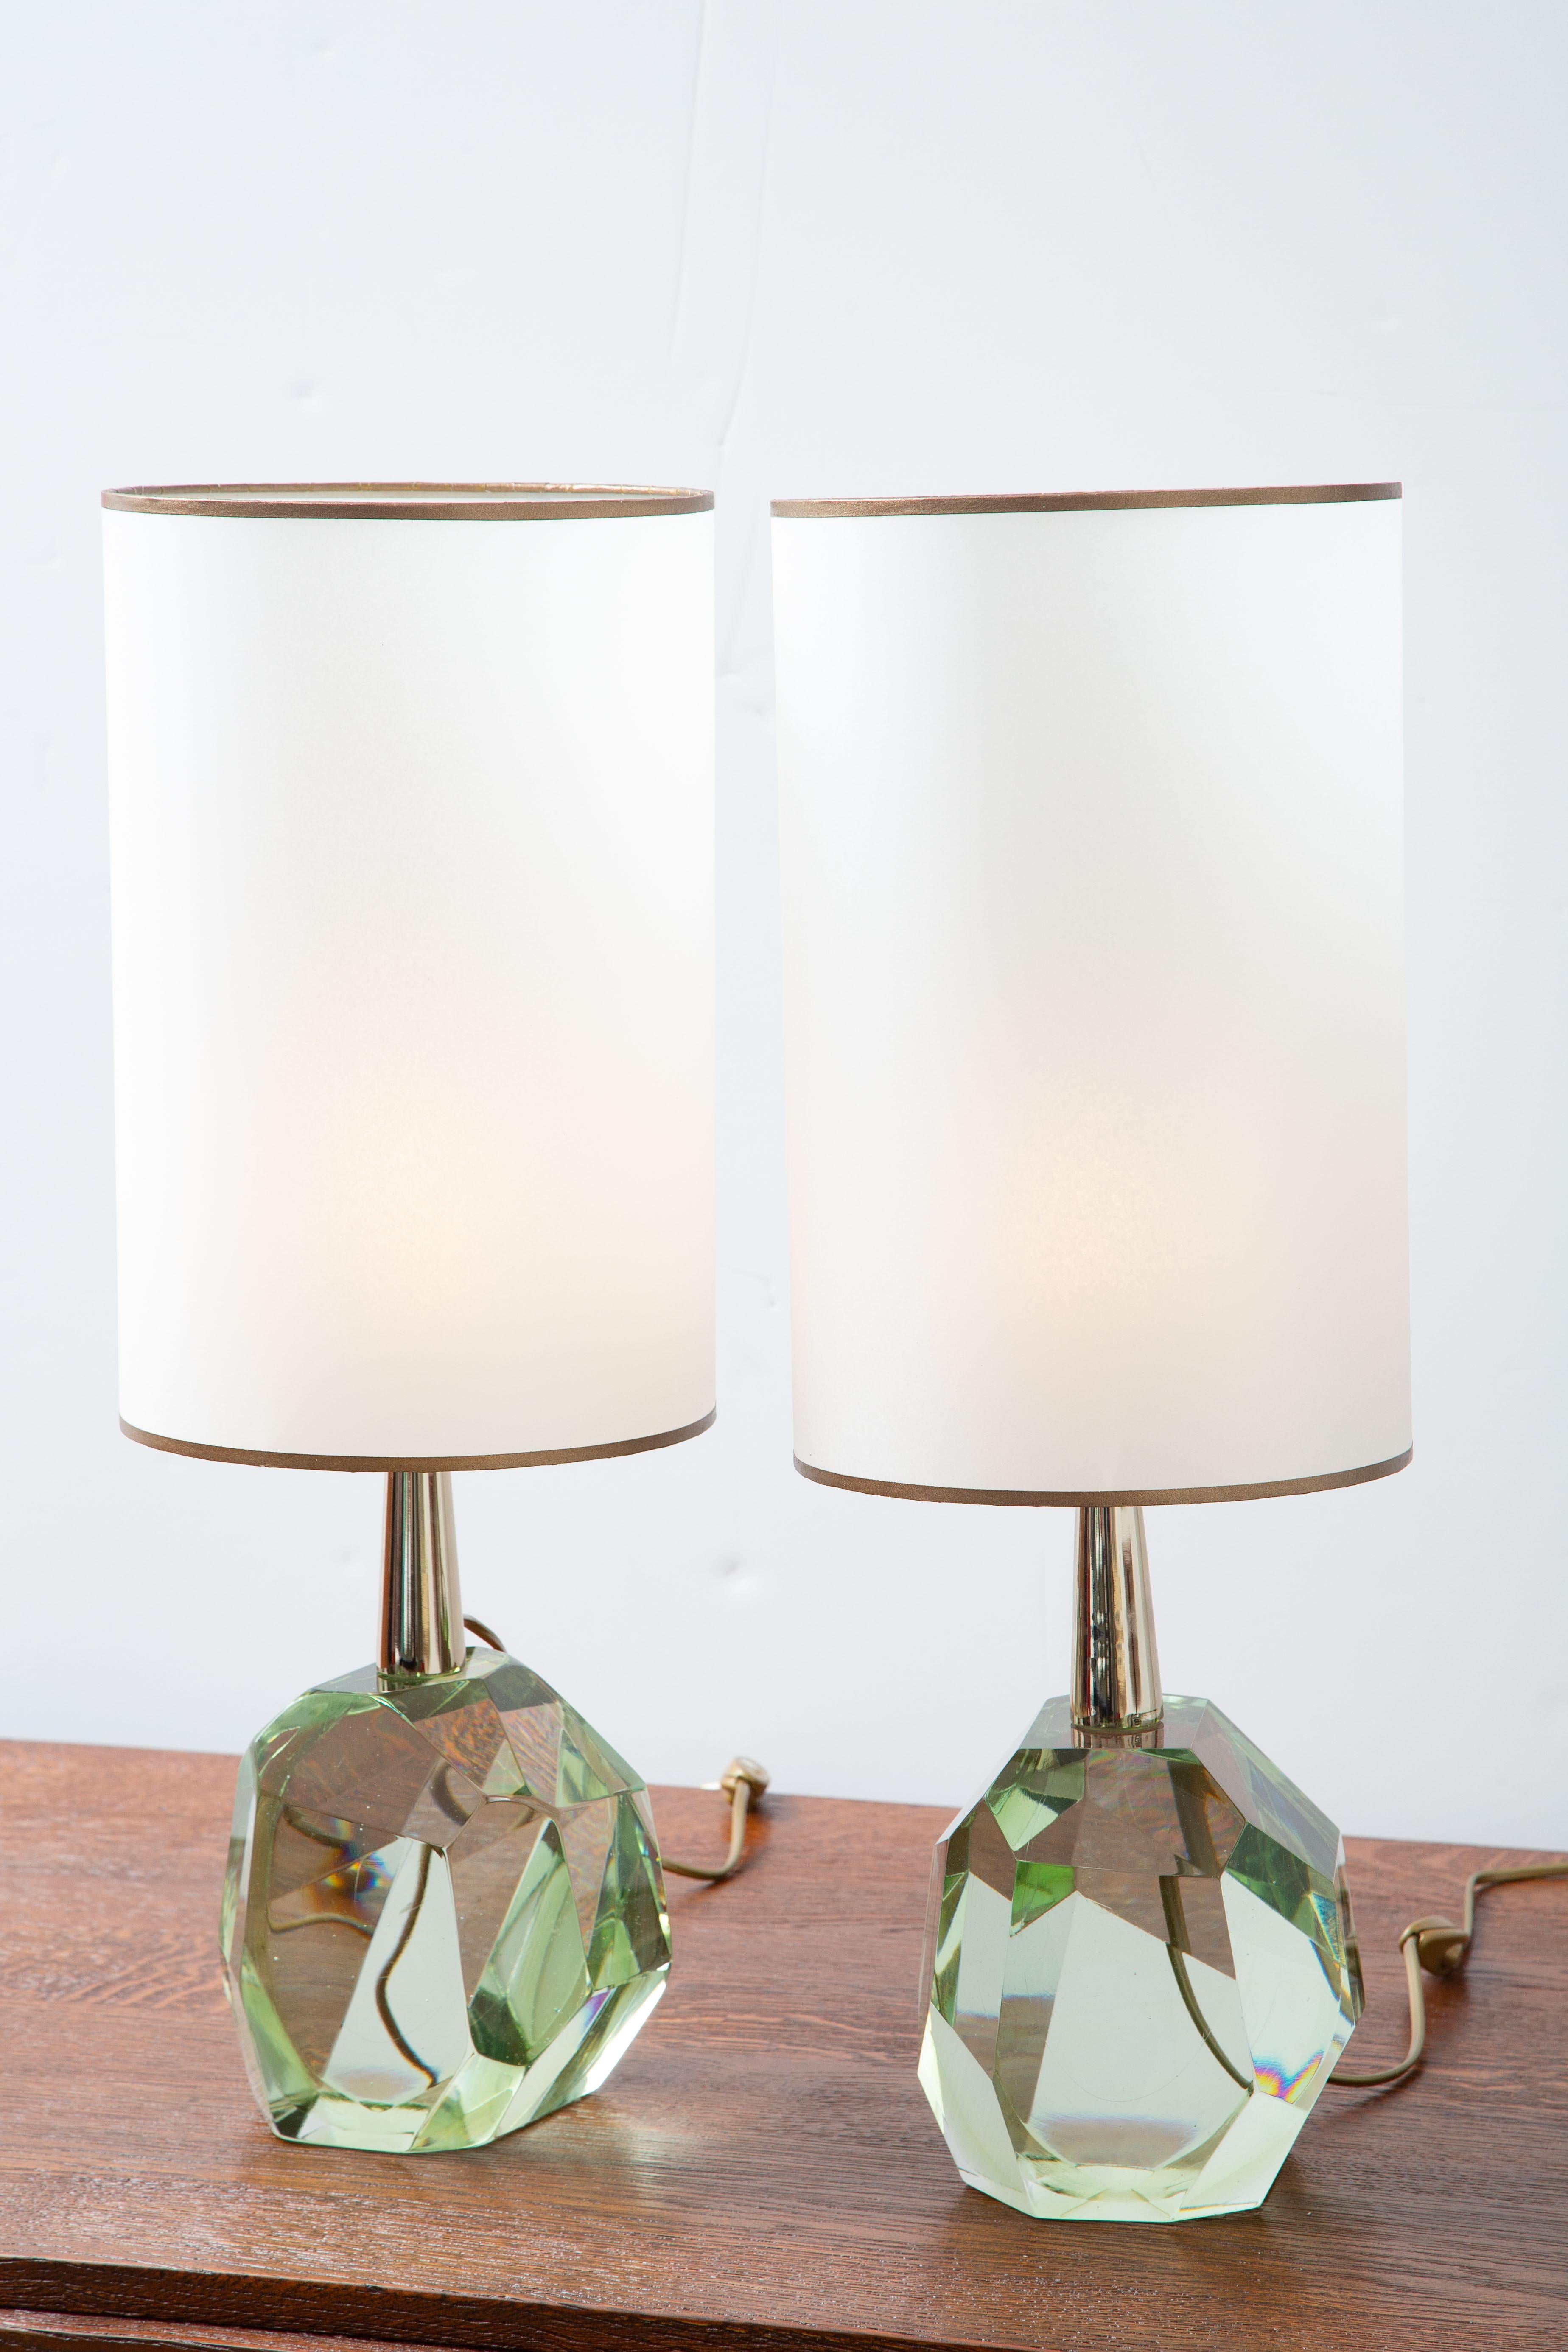 Pair of faceted diamond table lamps, in stock
Studio-made heavy solid rock translucent Murano glass
Green hue
Custom made parchment shades included.
Located in our store in Miami ready for shipping now.
Priced per pair
Shades are included
Wired to